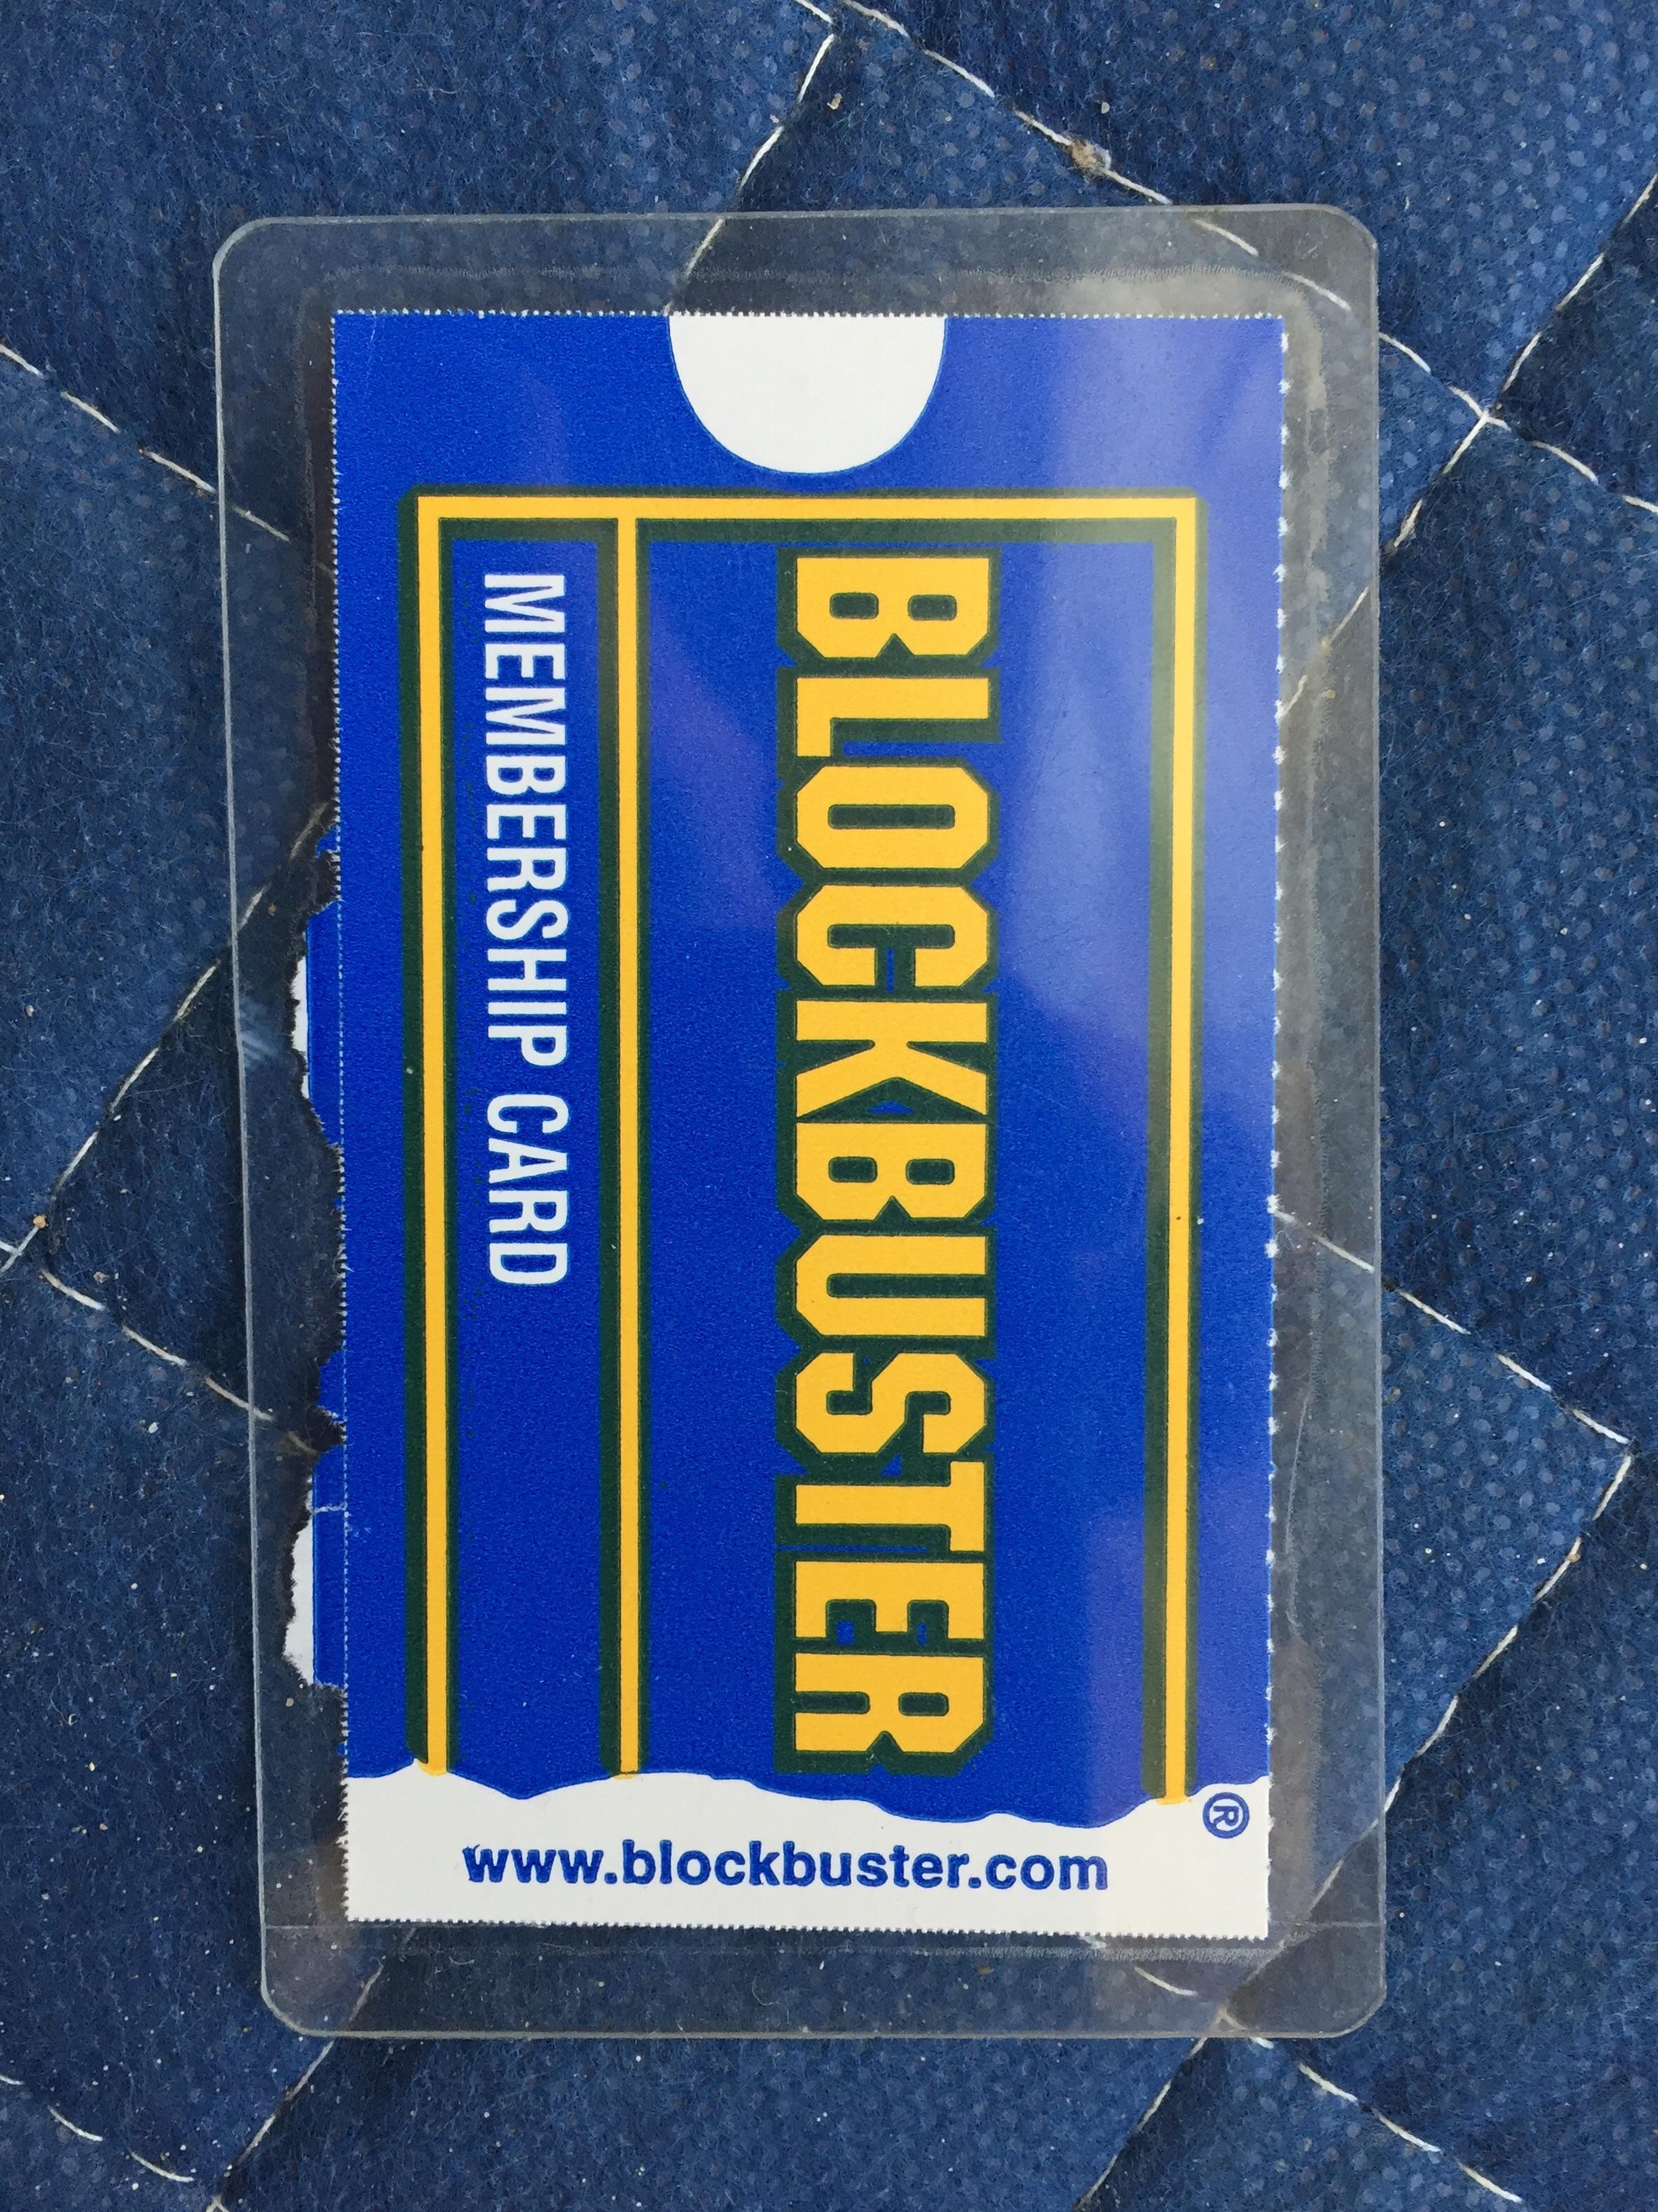 Old Blockbuster Logo - Saw this artifact while I was revisiting my old box of movies